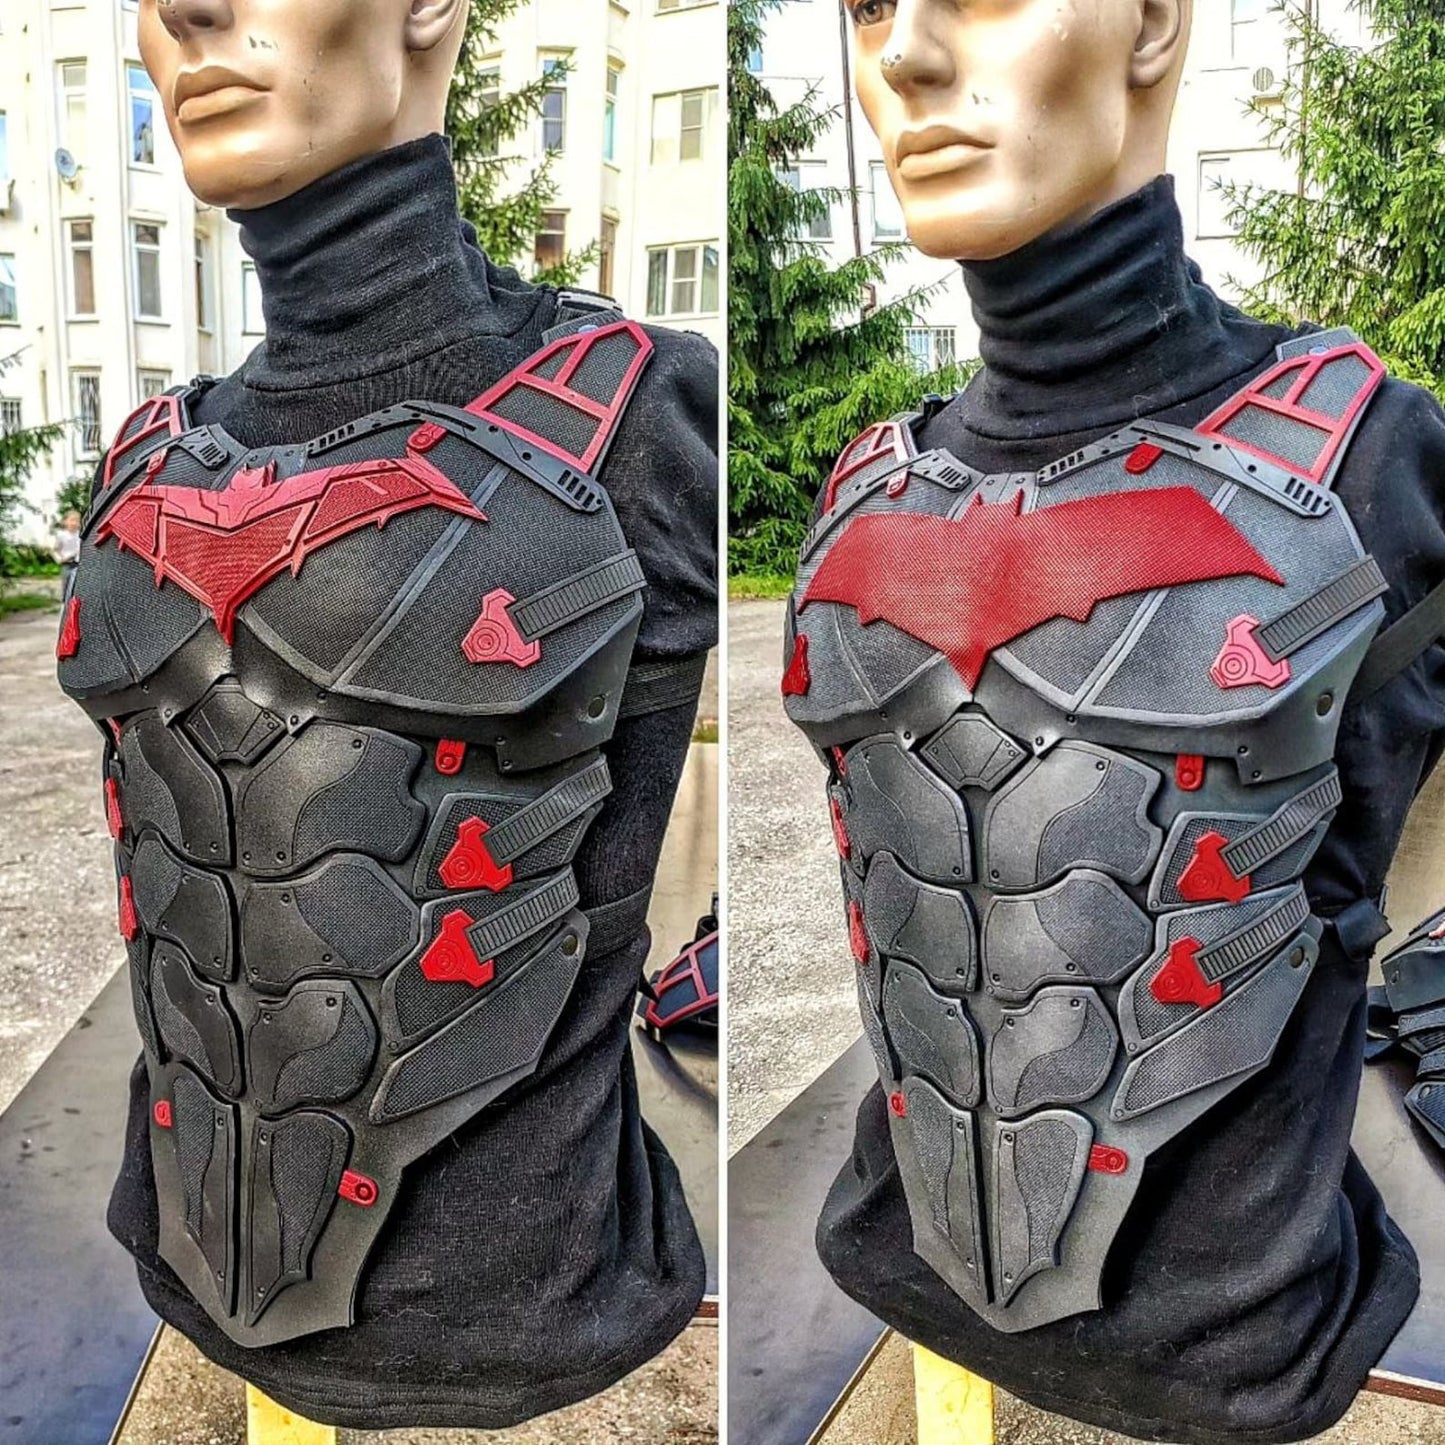 Redhood chest armor v2 Cosplay costume